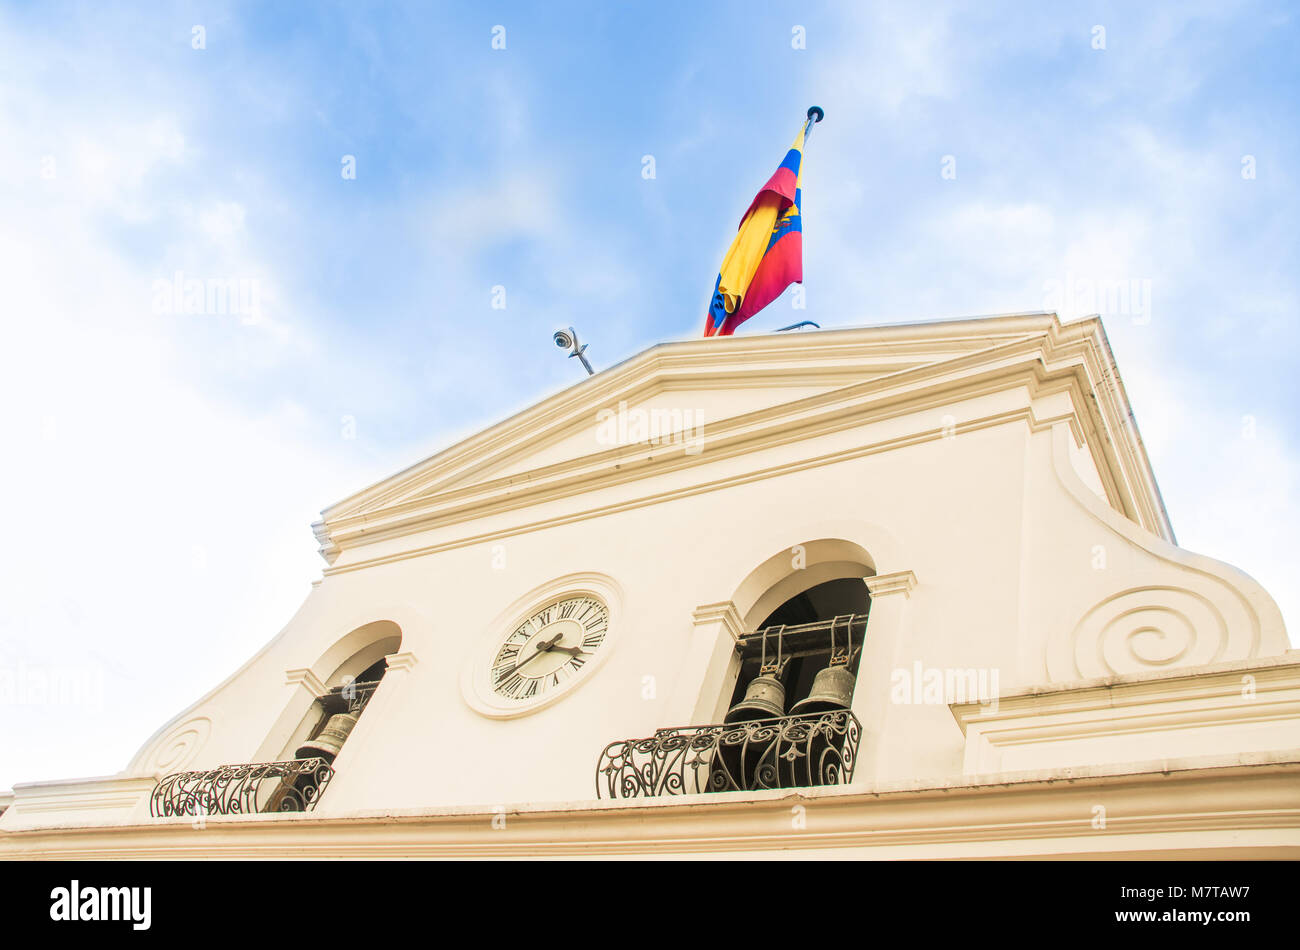 QUITO, ECUADOR, JANUARY, 11- 2018: Carondelet Palace is the seat of government of the Republic of Ecuador, located in Quito in the Independence Square Plaza Grande Stock Photo